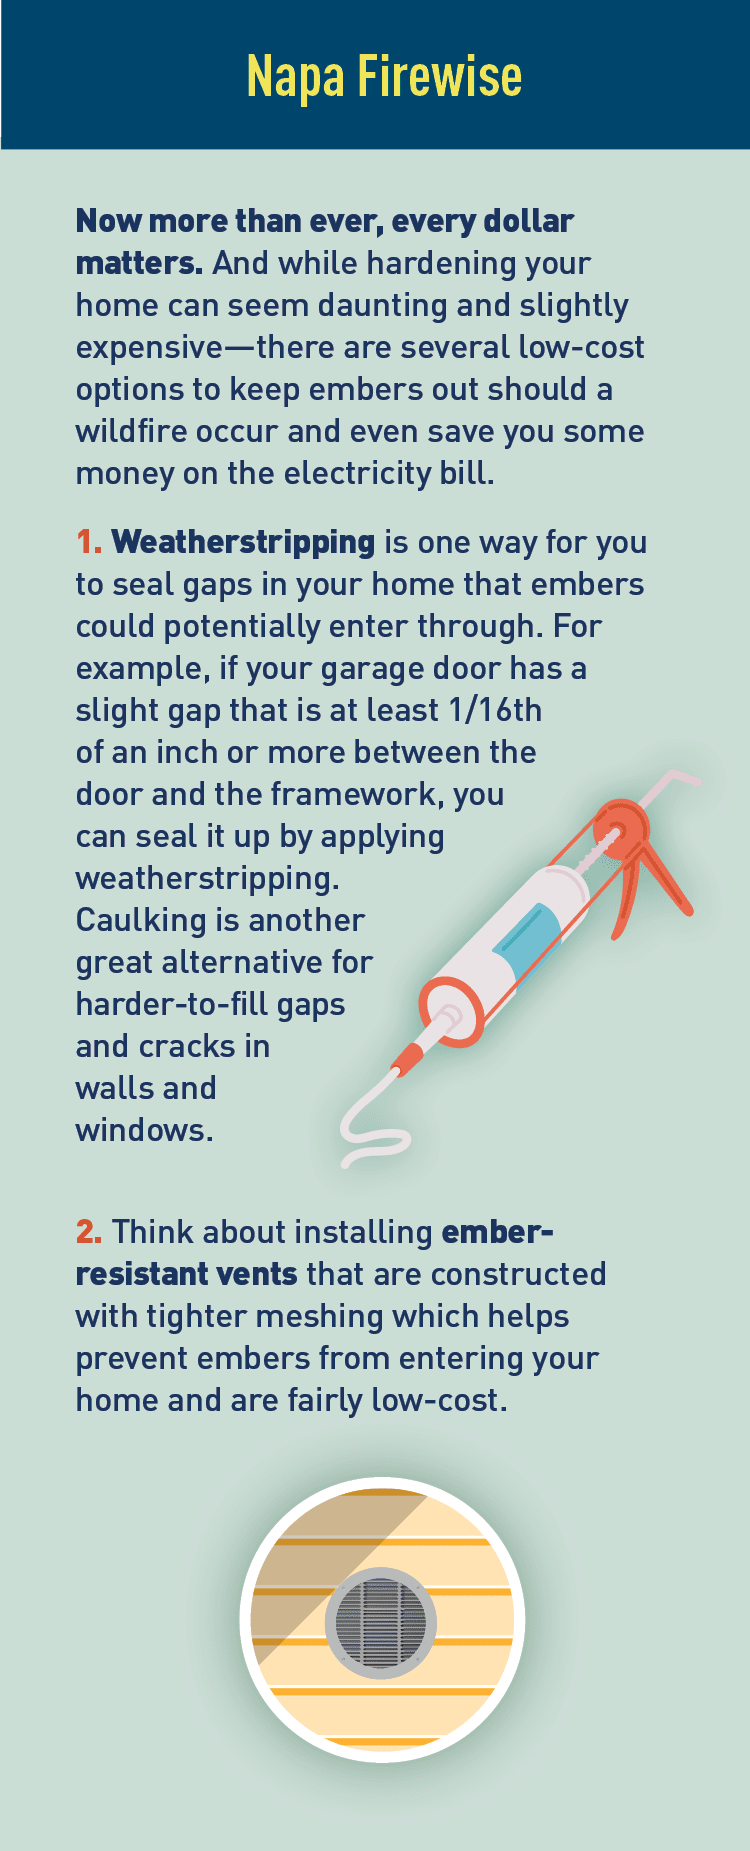 Graphic of Caulking gun and ember-resistant vent. Description: Napa Firewise. Now more than ever, every dollar matters. And while hardening your home can seem daunting and slightly expensive-there are several low-cost options to keep embers out should a wildfire occur and even save you some money on the electricity bill.

1. Weatherstripping is one way for you to seal gaps in your home that embers could potentially enter through. For example, if your garage door has a slight gap that is at least 1/16th of an inch or more between the door and the framework, you can seal it up by applying weatherstripping. Caulking is another great alternative for harder-to-fill gaps and cracks in walls and windows.

2. Think about installing ember- resistant vents that are constructed with tighter meshing which helps prevent embers from entering your home and are fairly low-cost.